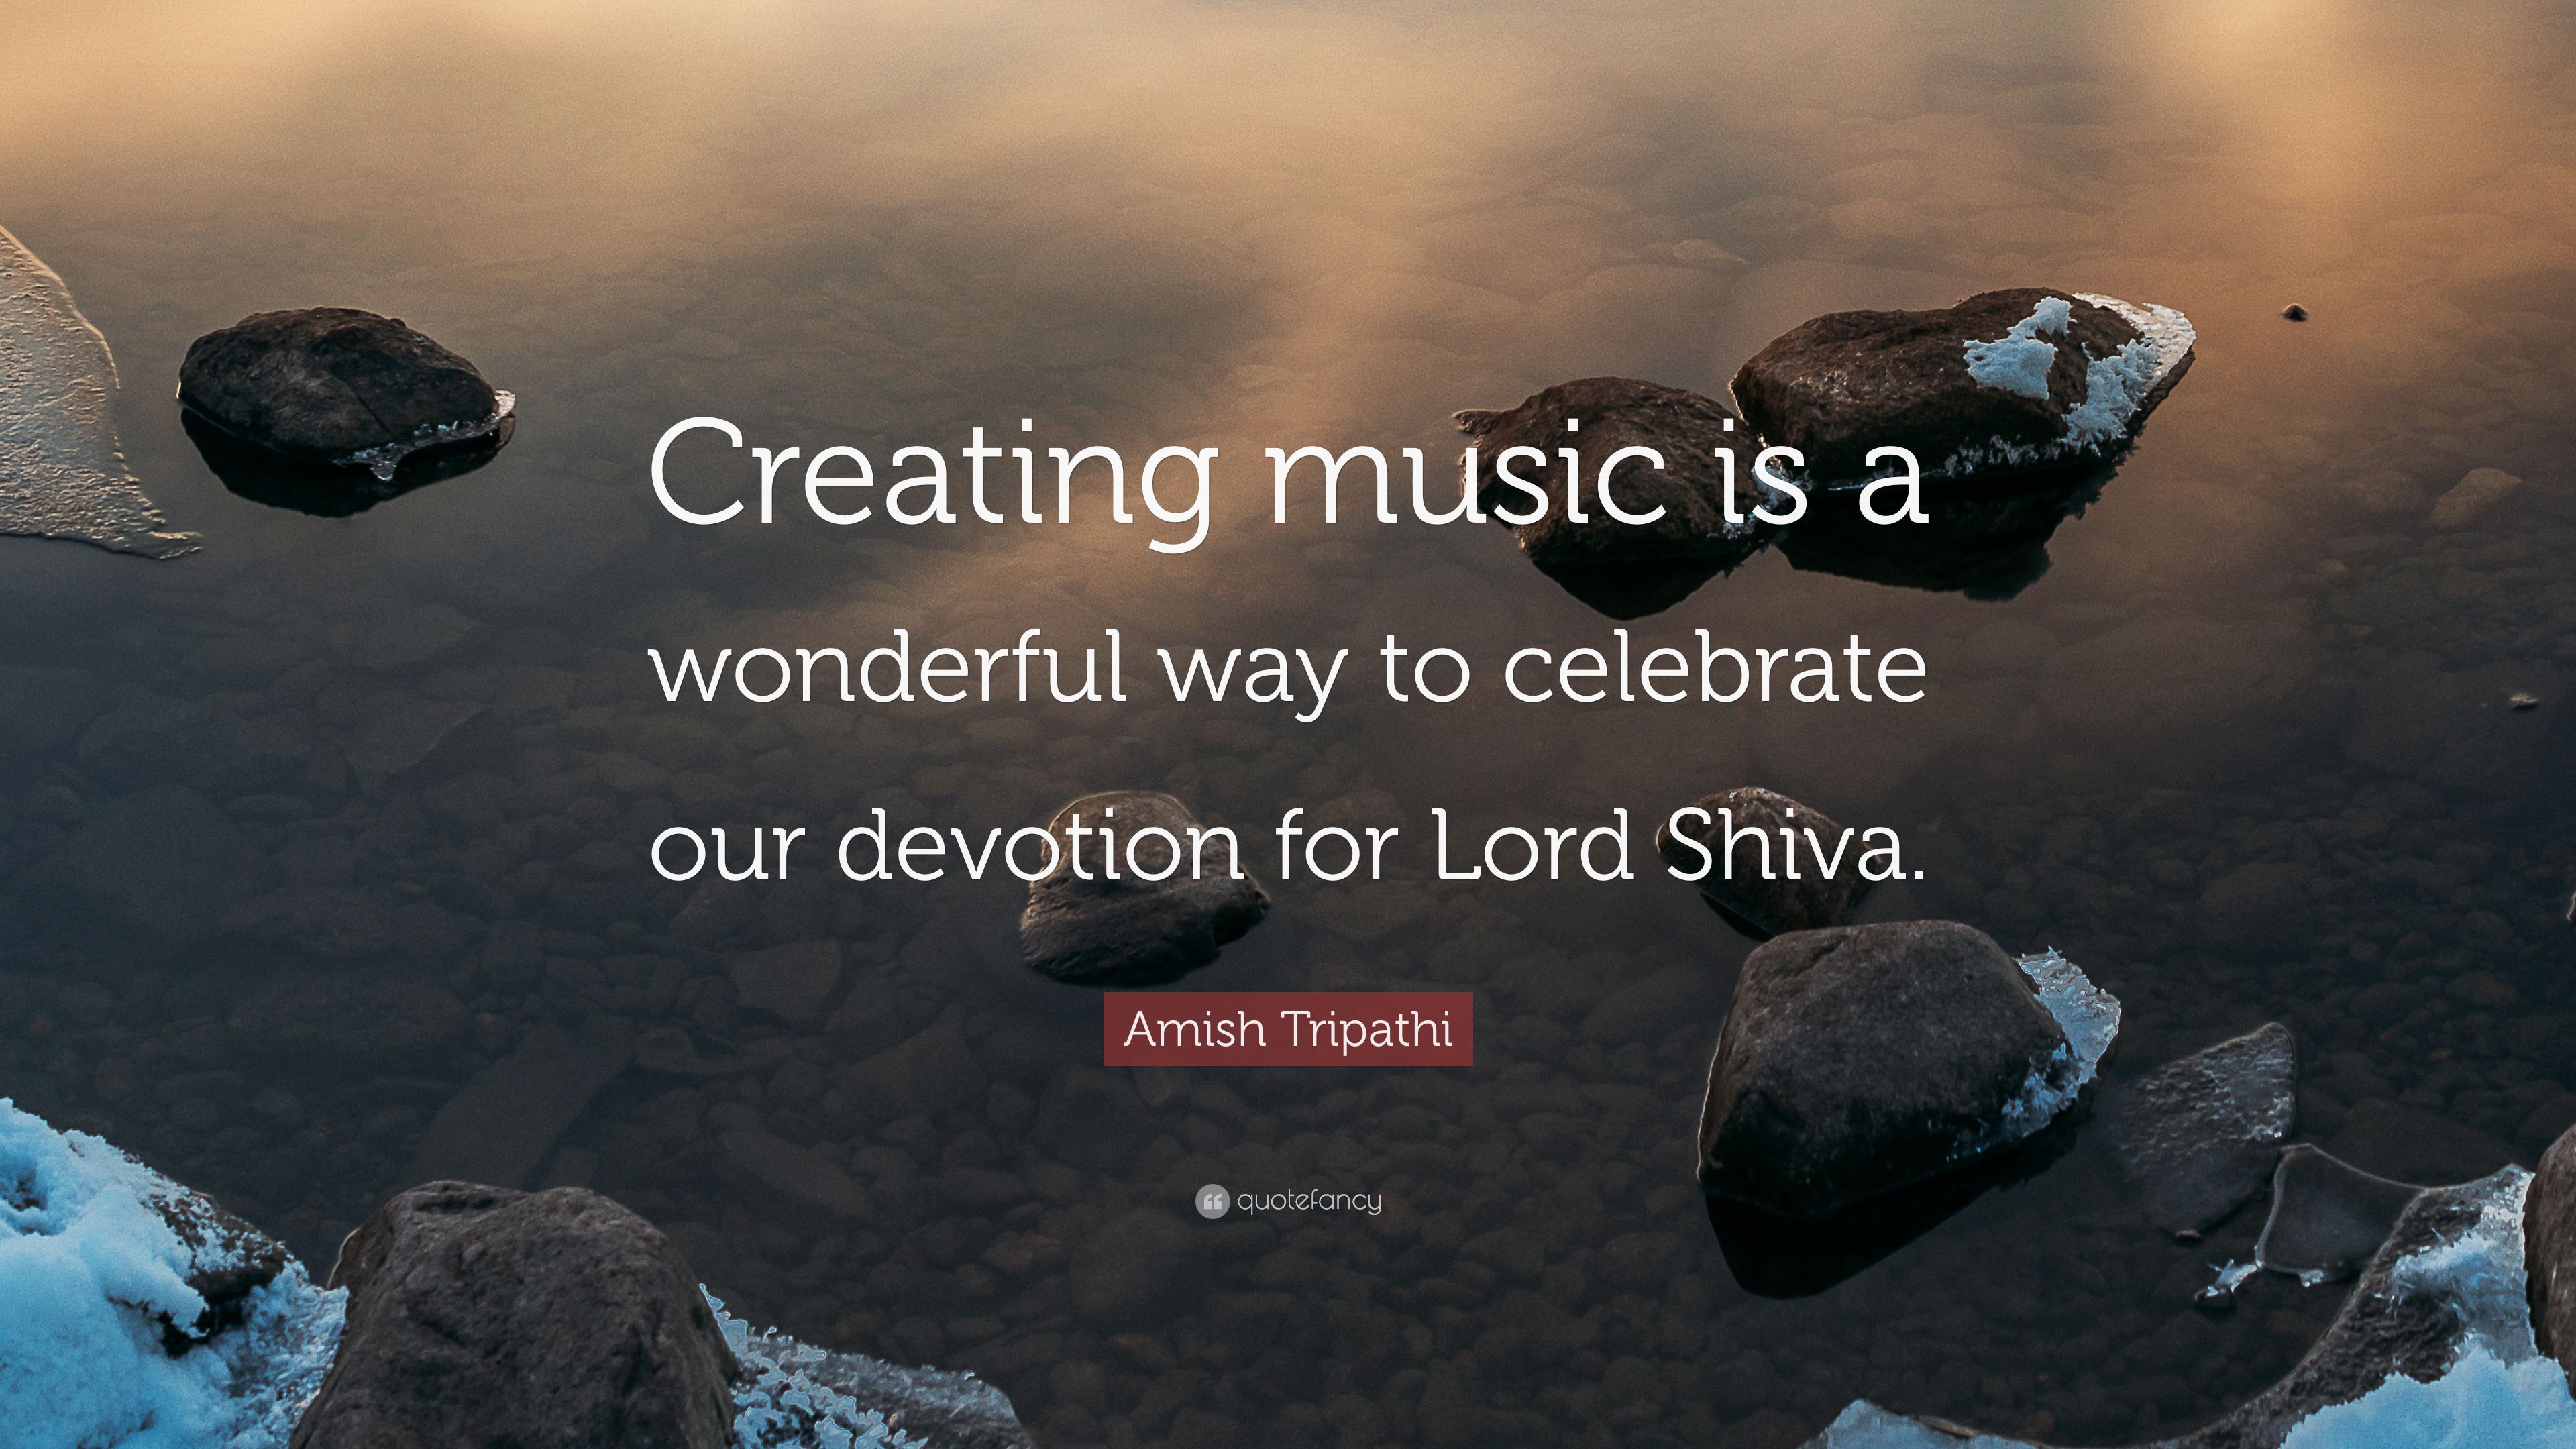 Amish Tripathi Quote: “Creating music is a wonderful way to celebrate our devotion for Lord Shiva.” (7 wallpaper)